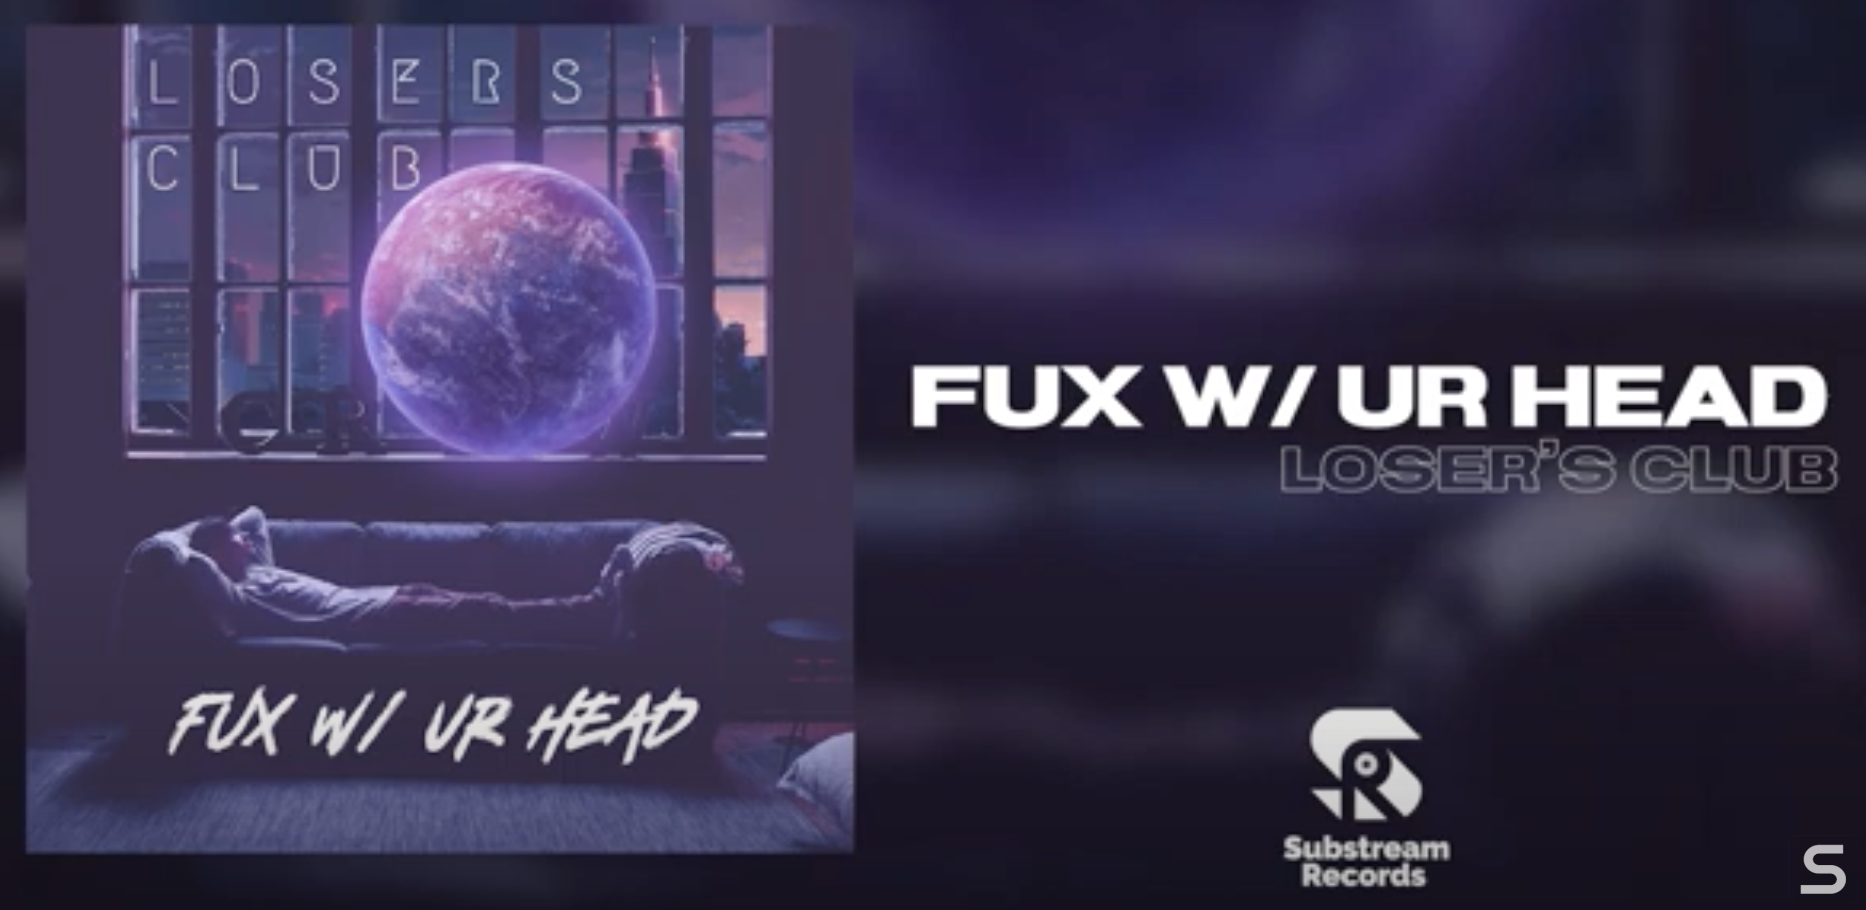 Losers Club Release New Single And Video For ‘Fux W/ Ur Head’